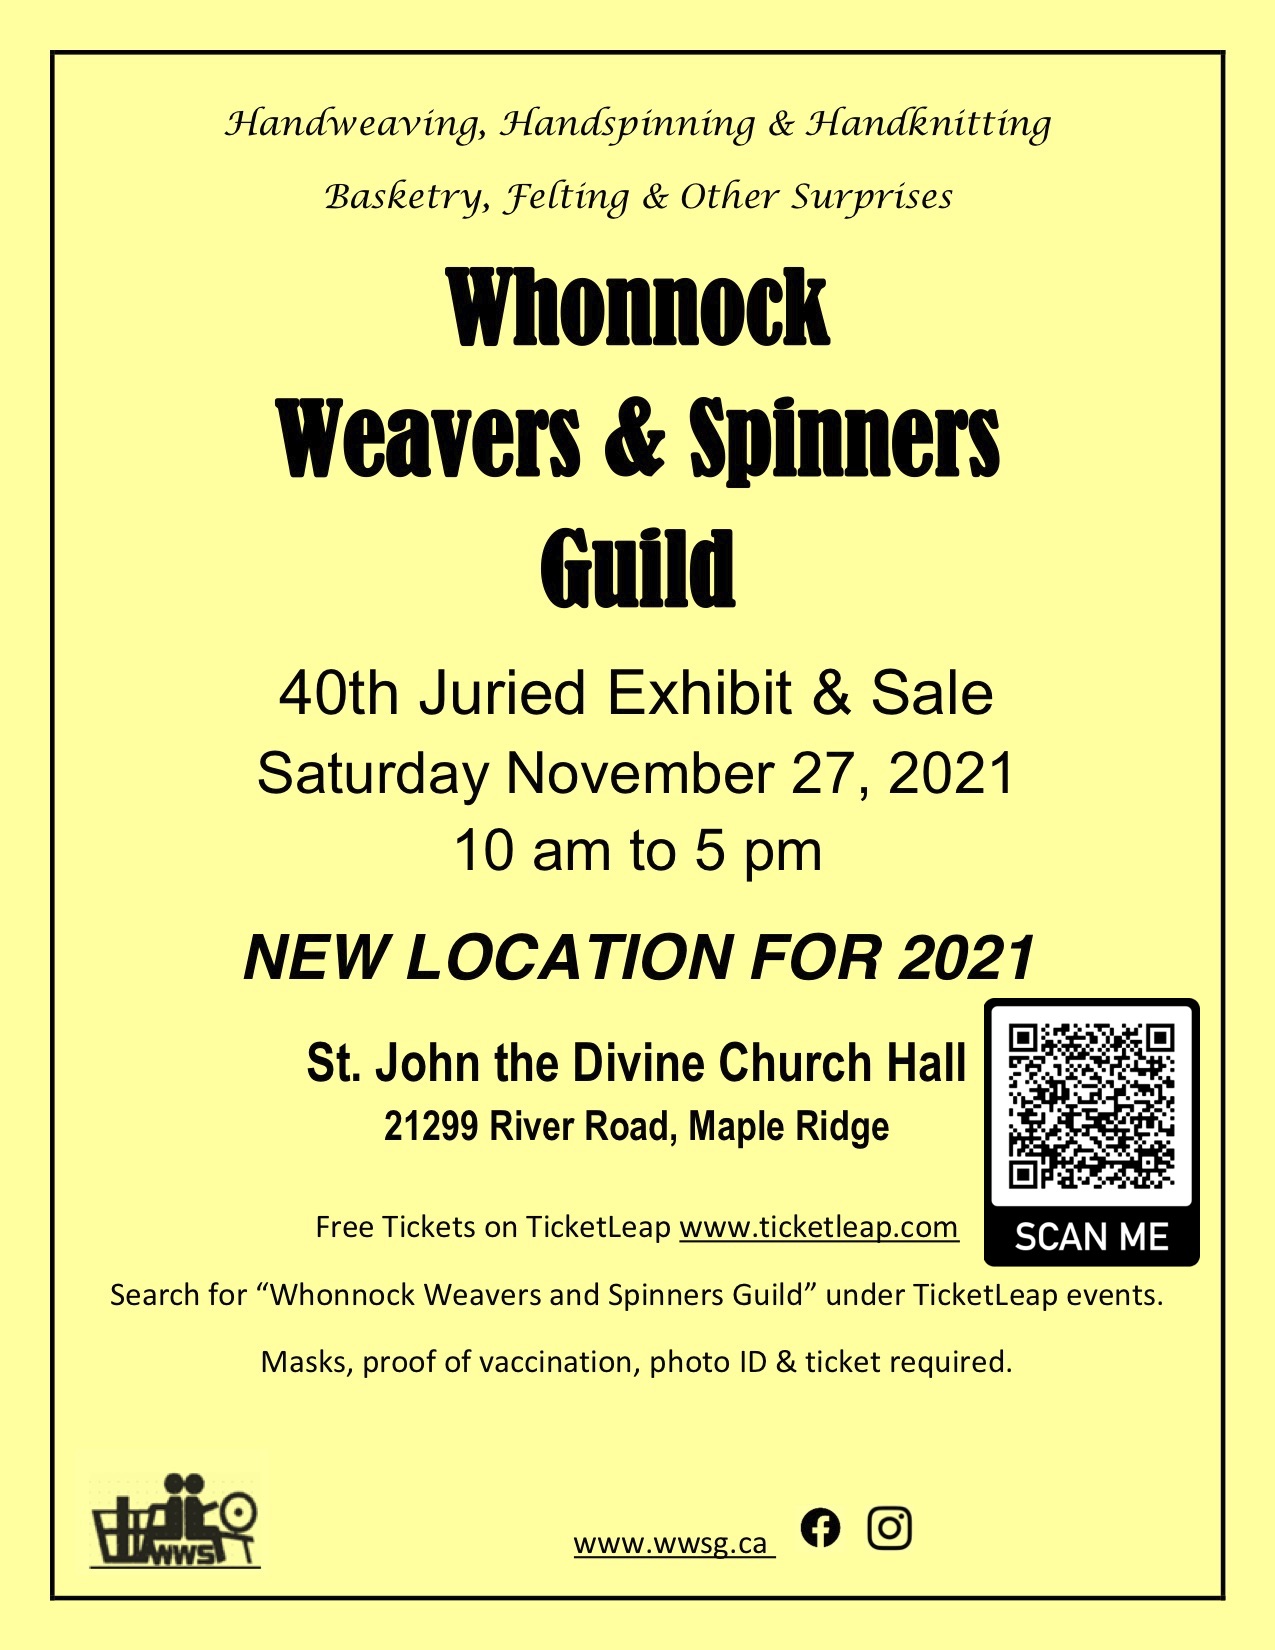 Whonnock Weavers and Spinners Guild